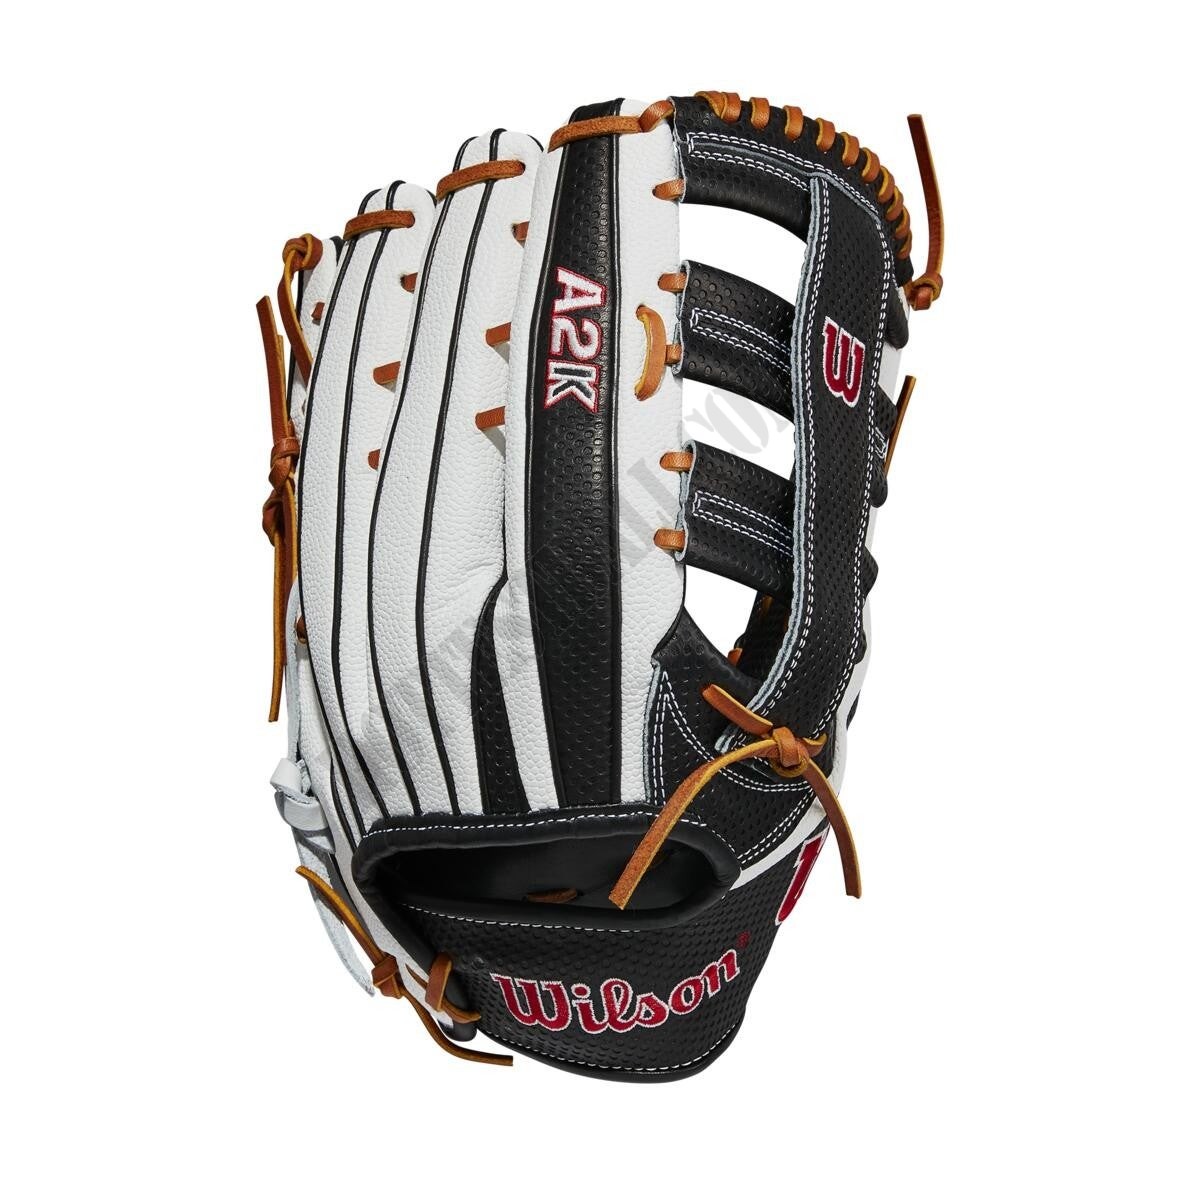 2021 A2K SC1775SS 12.75" Outfield Baseball Glove - Limited Edition ● Wilson Promotions - -1